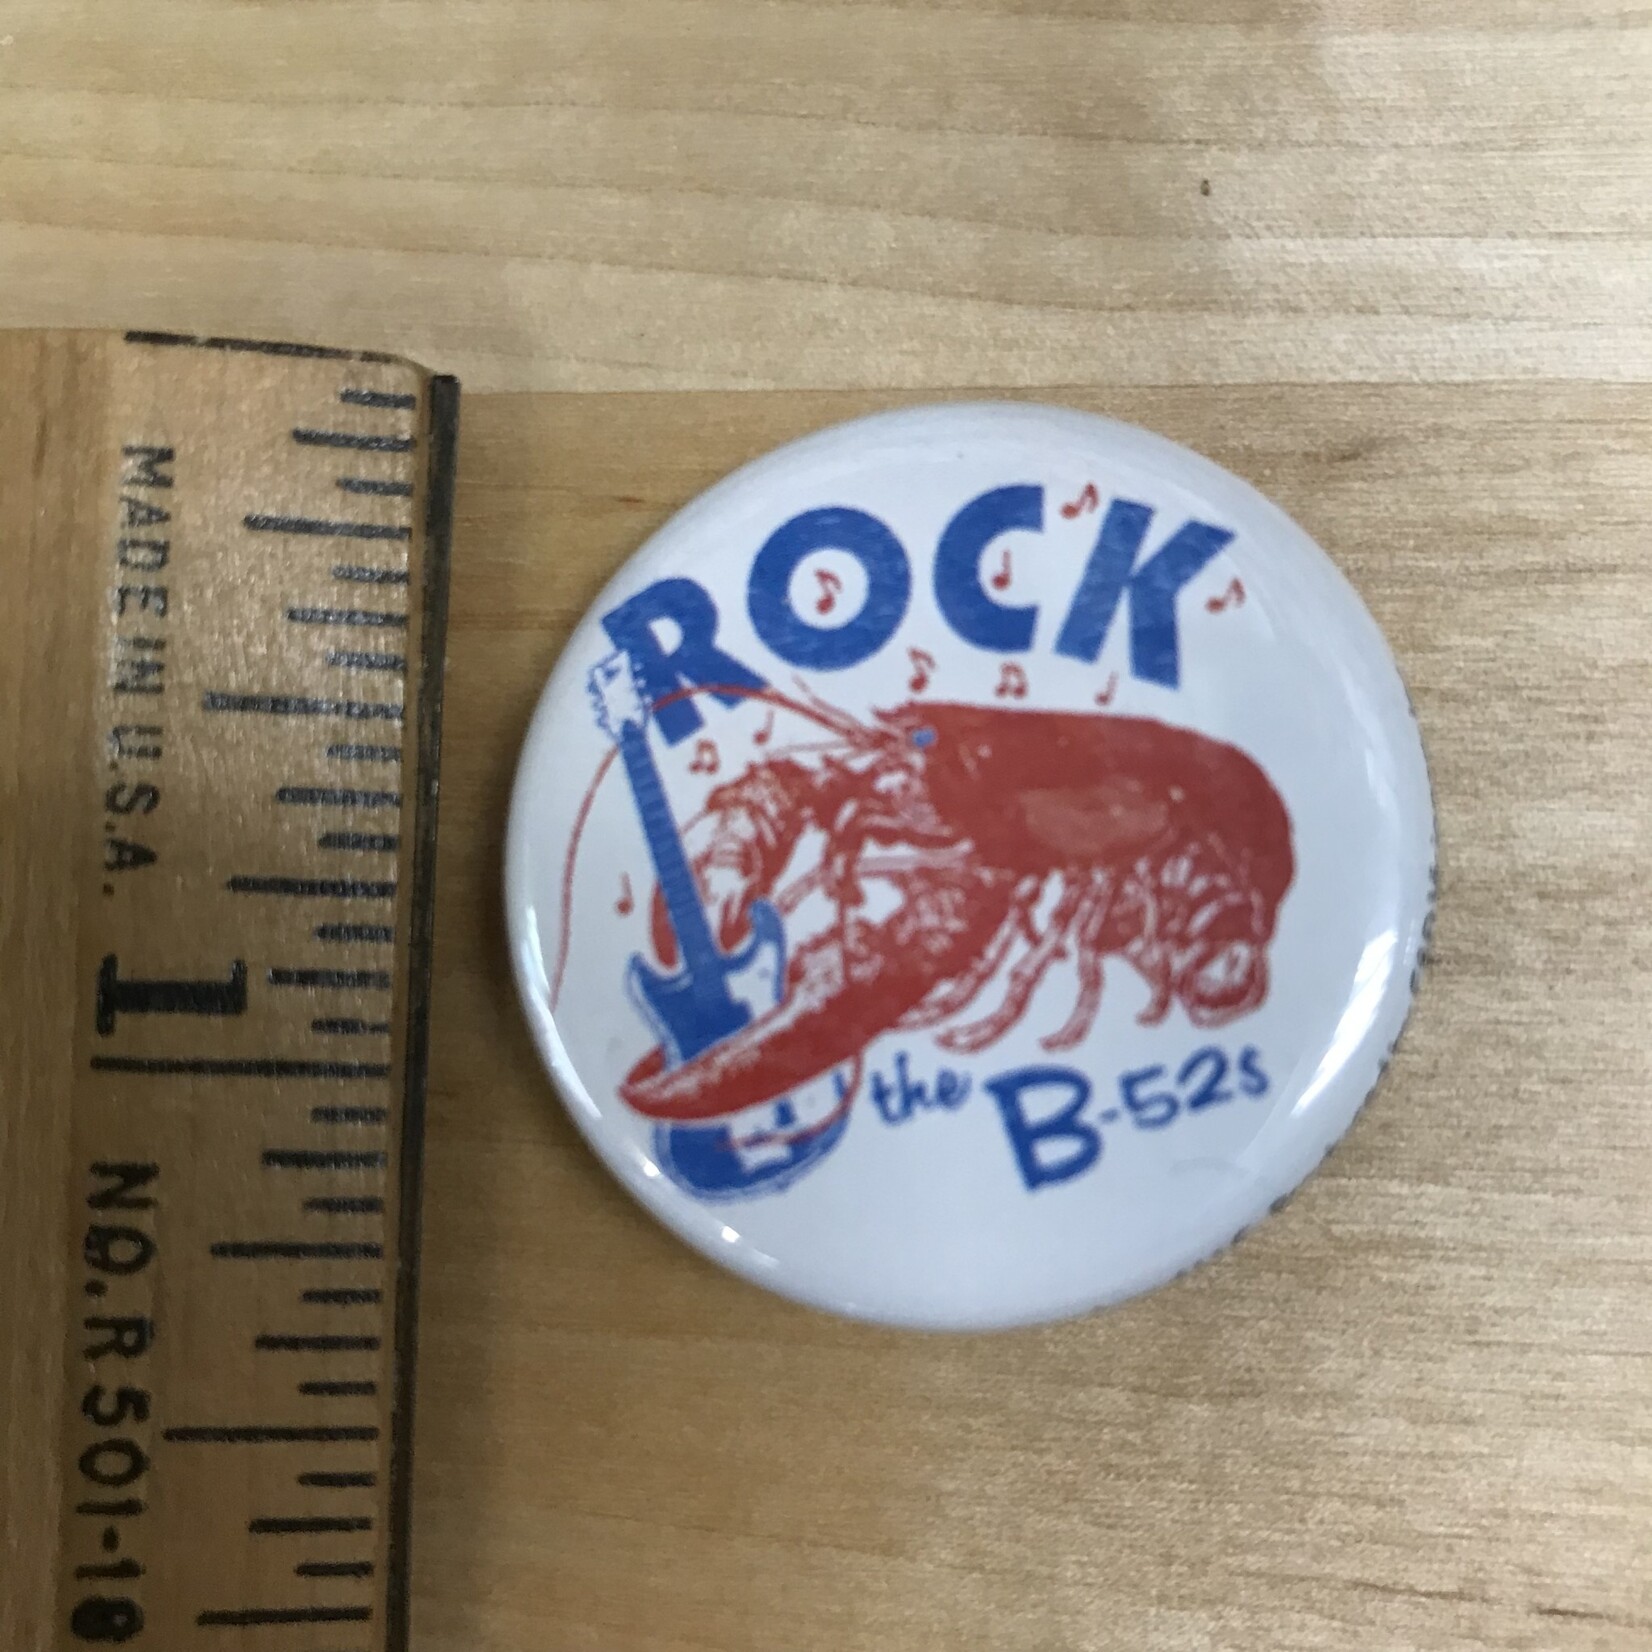 B-52’s - Rock Lobster - 1.25 Inch Pin Back Button (NEW)